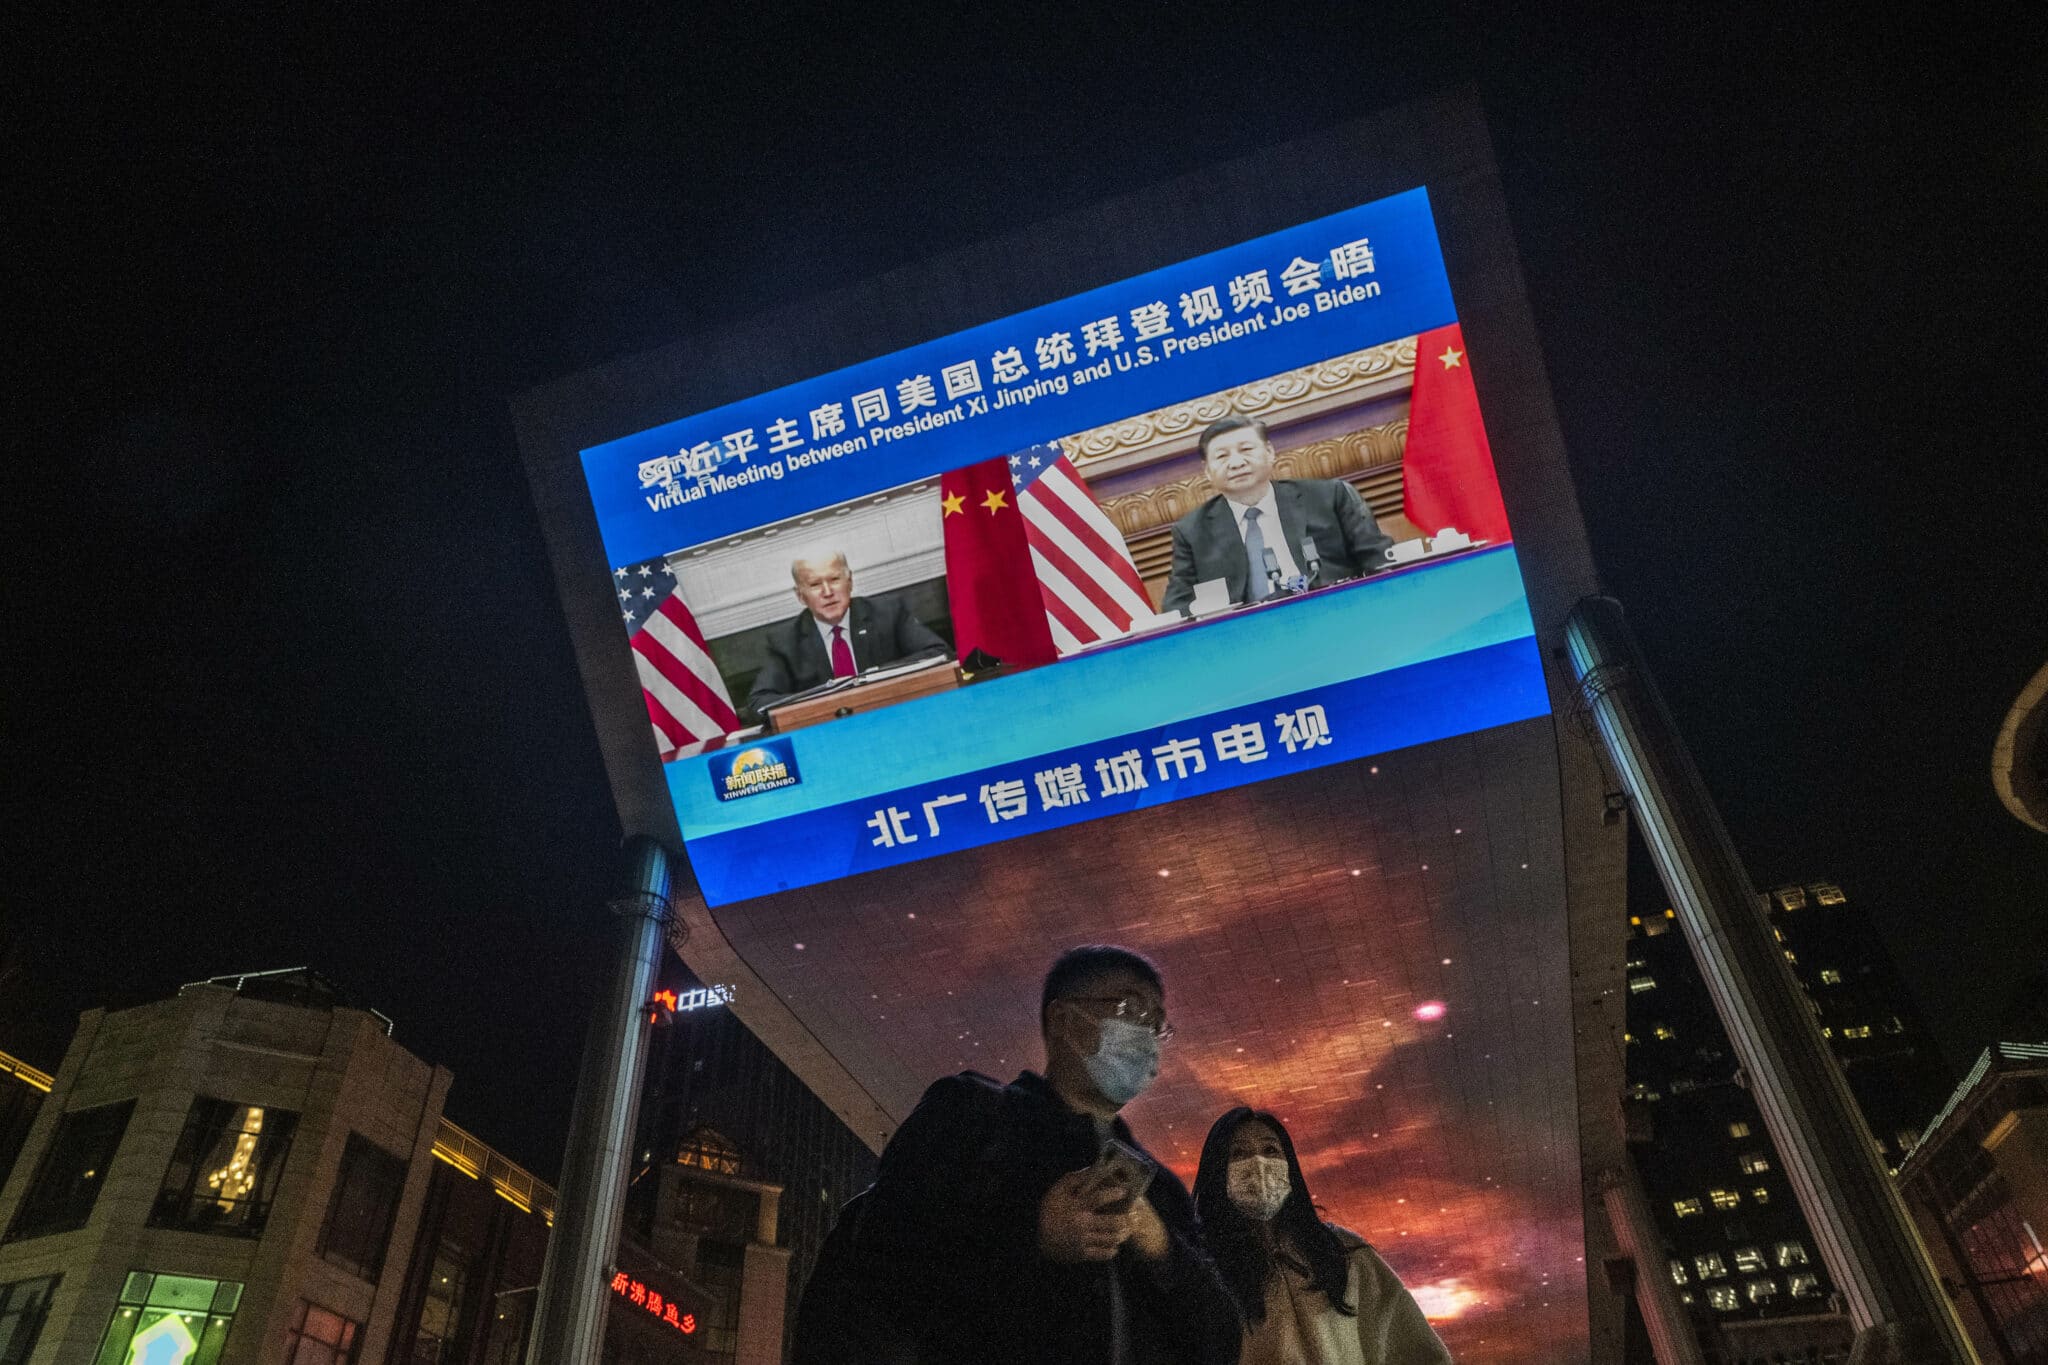 BEIJING, CHINA - NOVEMBER 16: A large screen displays United States President Joe Biden, left, and China's President Xi Jinping during a virtual summit as people walk by during the evening CCTV news broadcast outside a shopping mall on November 16, 2021 in Beijing, China. The two leaders met for more than three hours and discussed trade, climate change, Taiwan and other issues in what was their longest meeting since Biden was elected last year. (Photo by Kevin Frayer/Getty Images)